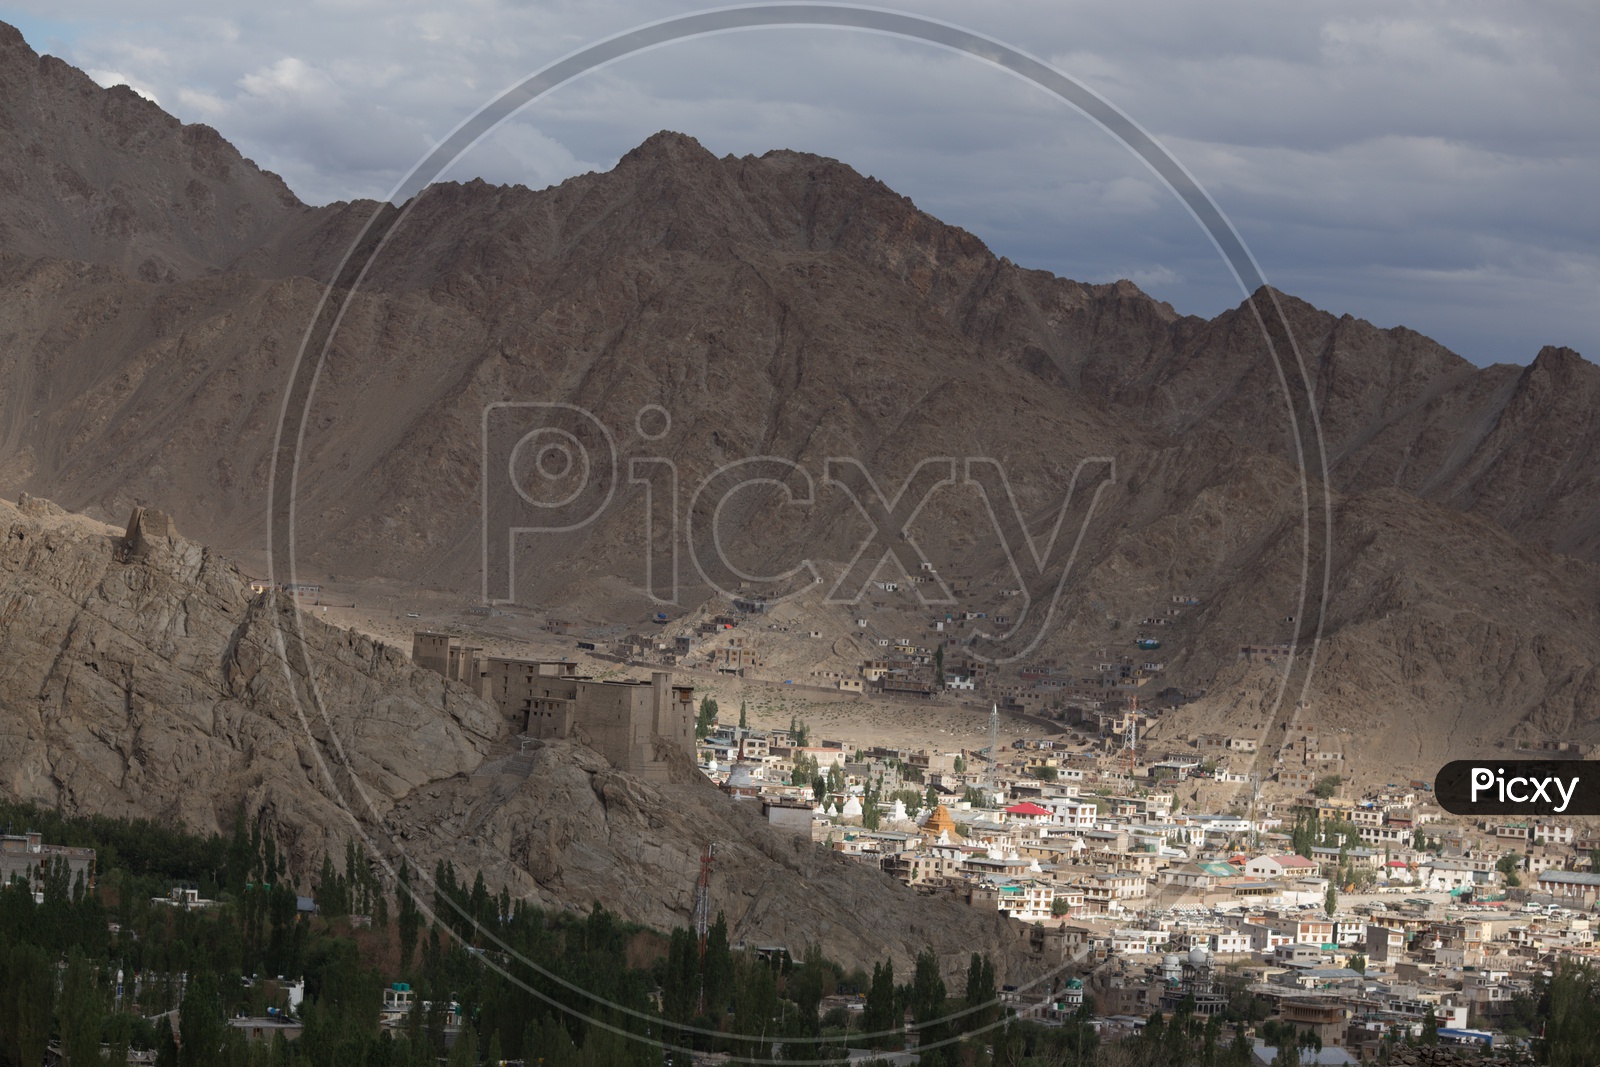 Leh Mountains with houses in the foreground